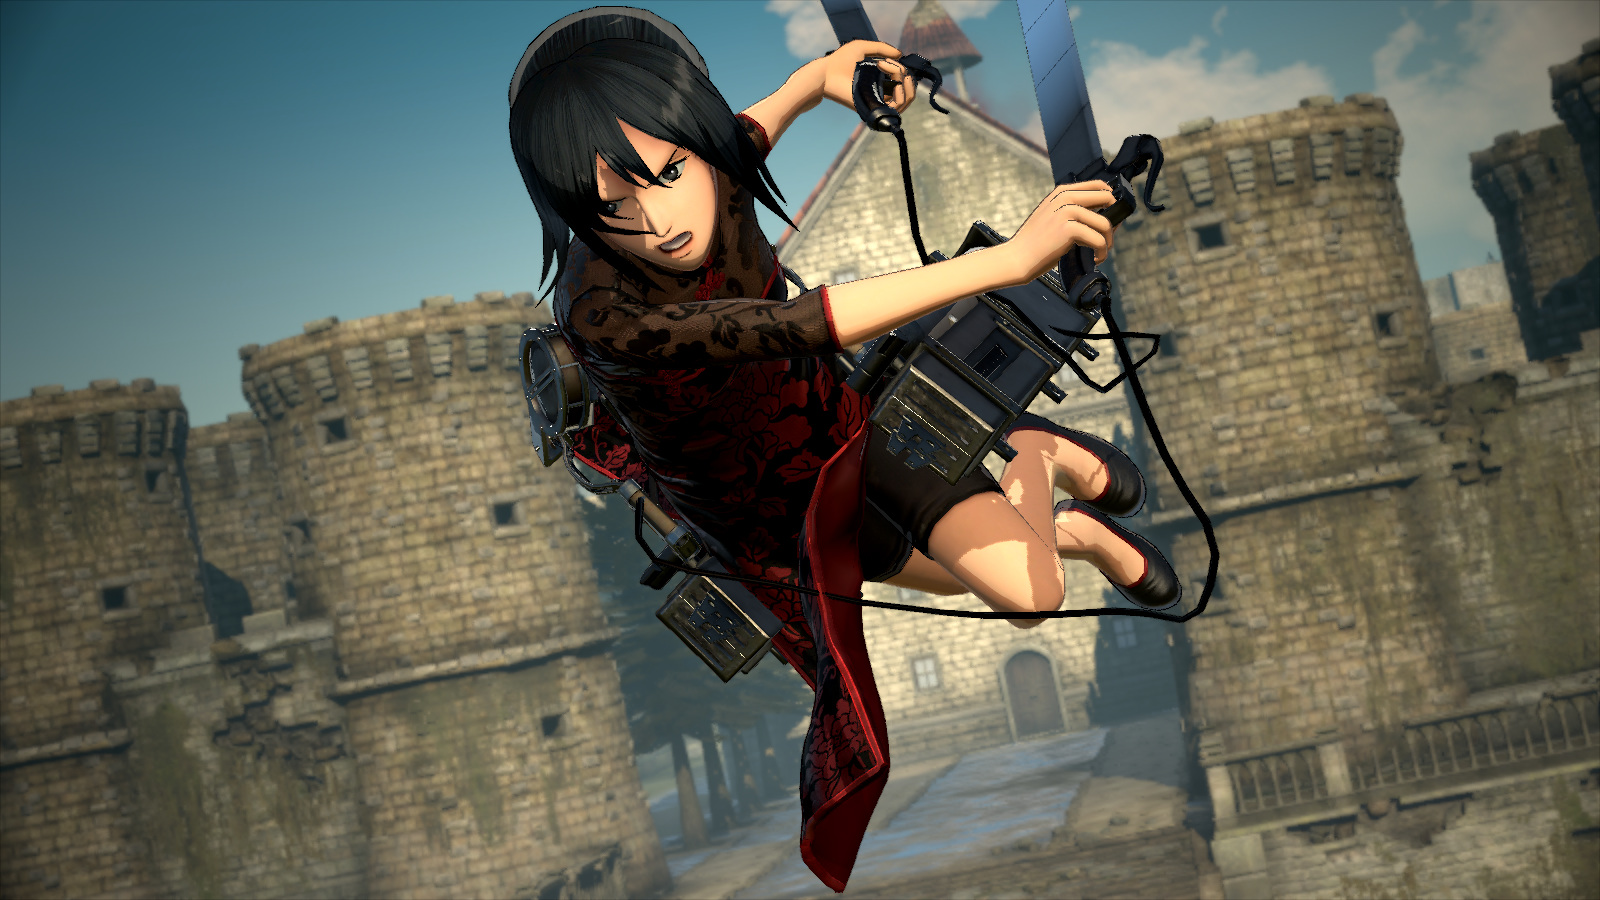 Additional Mikasa Costume: Chinese Dress Outfit on Steam